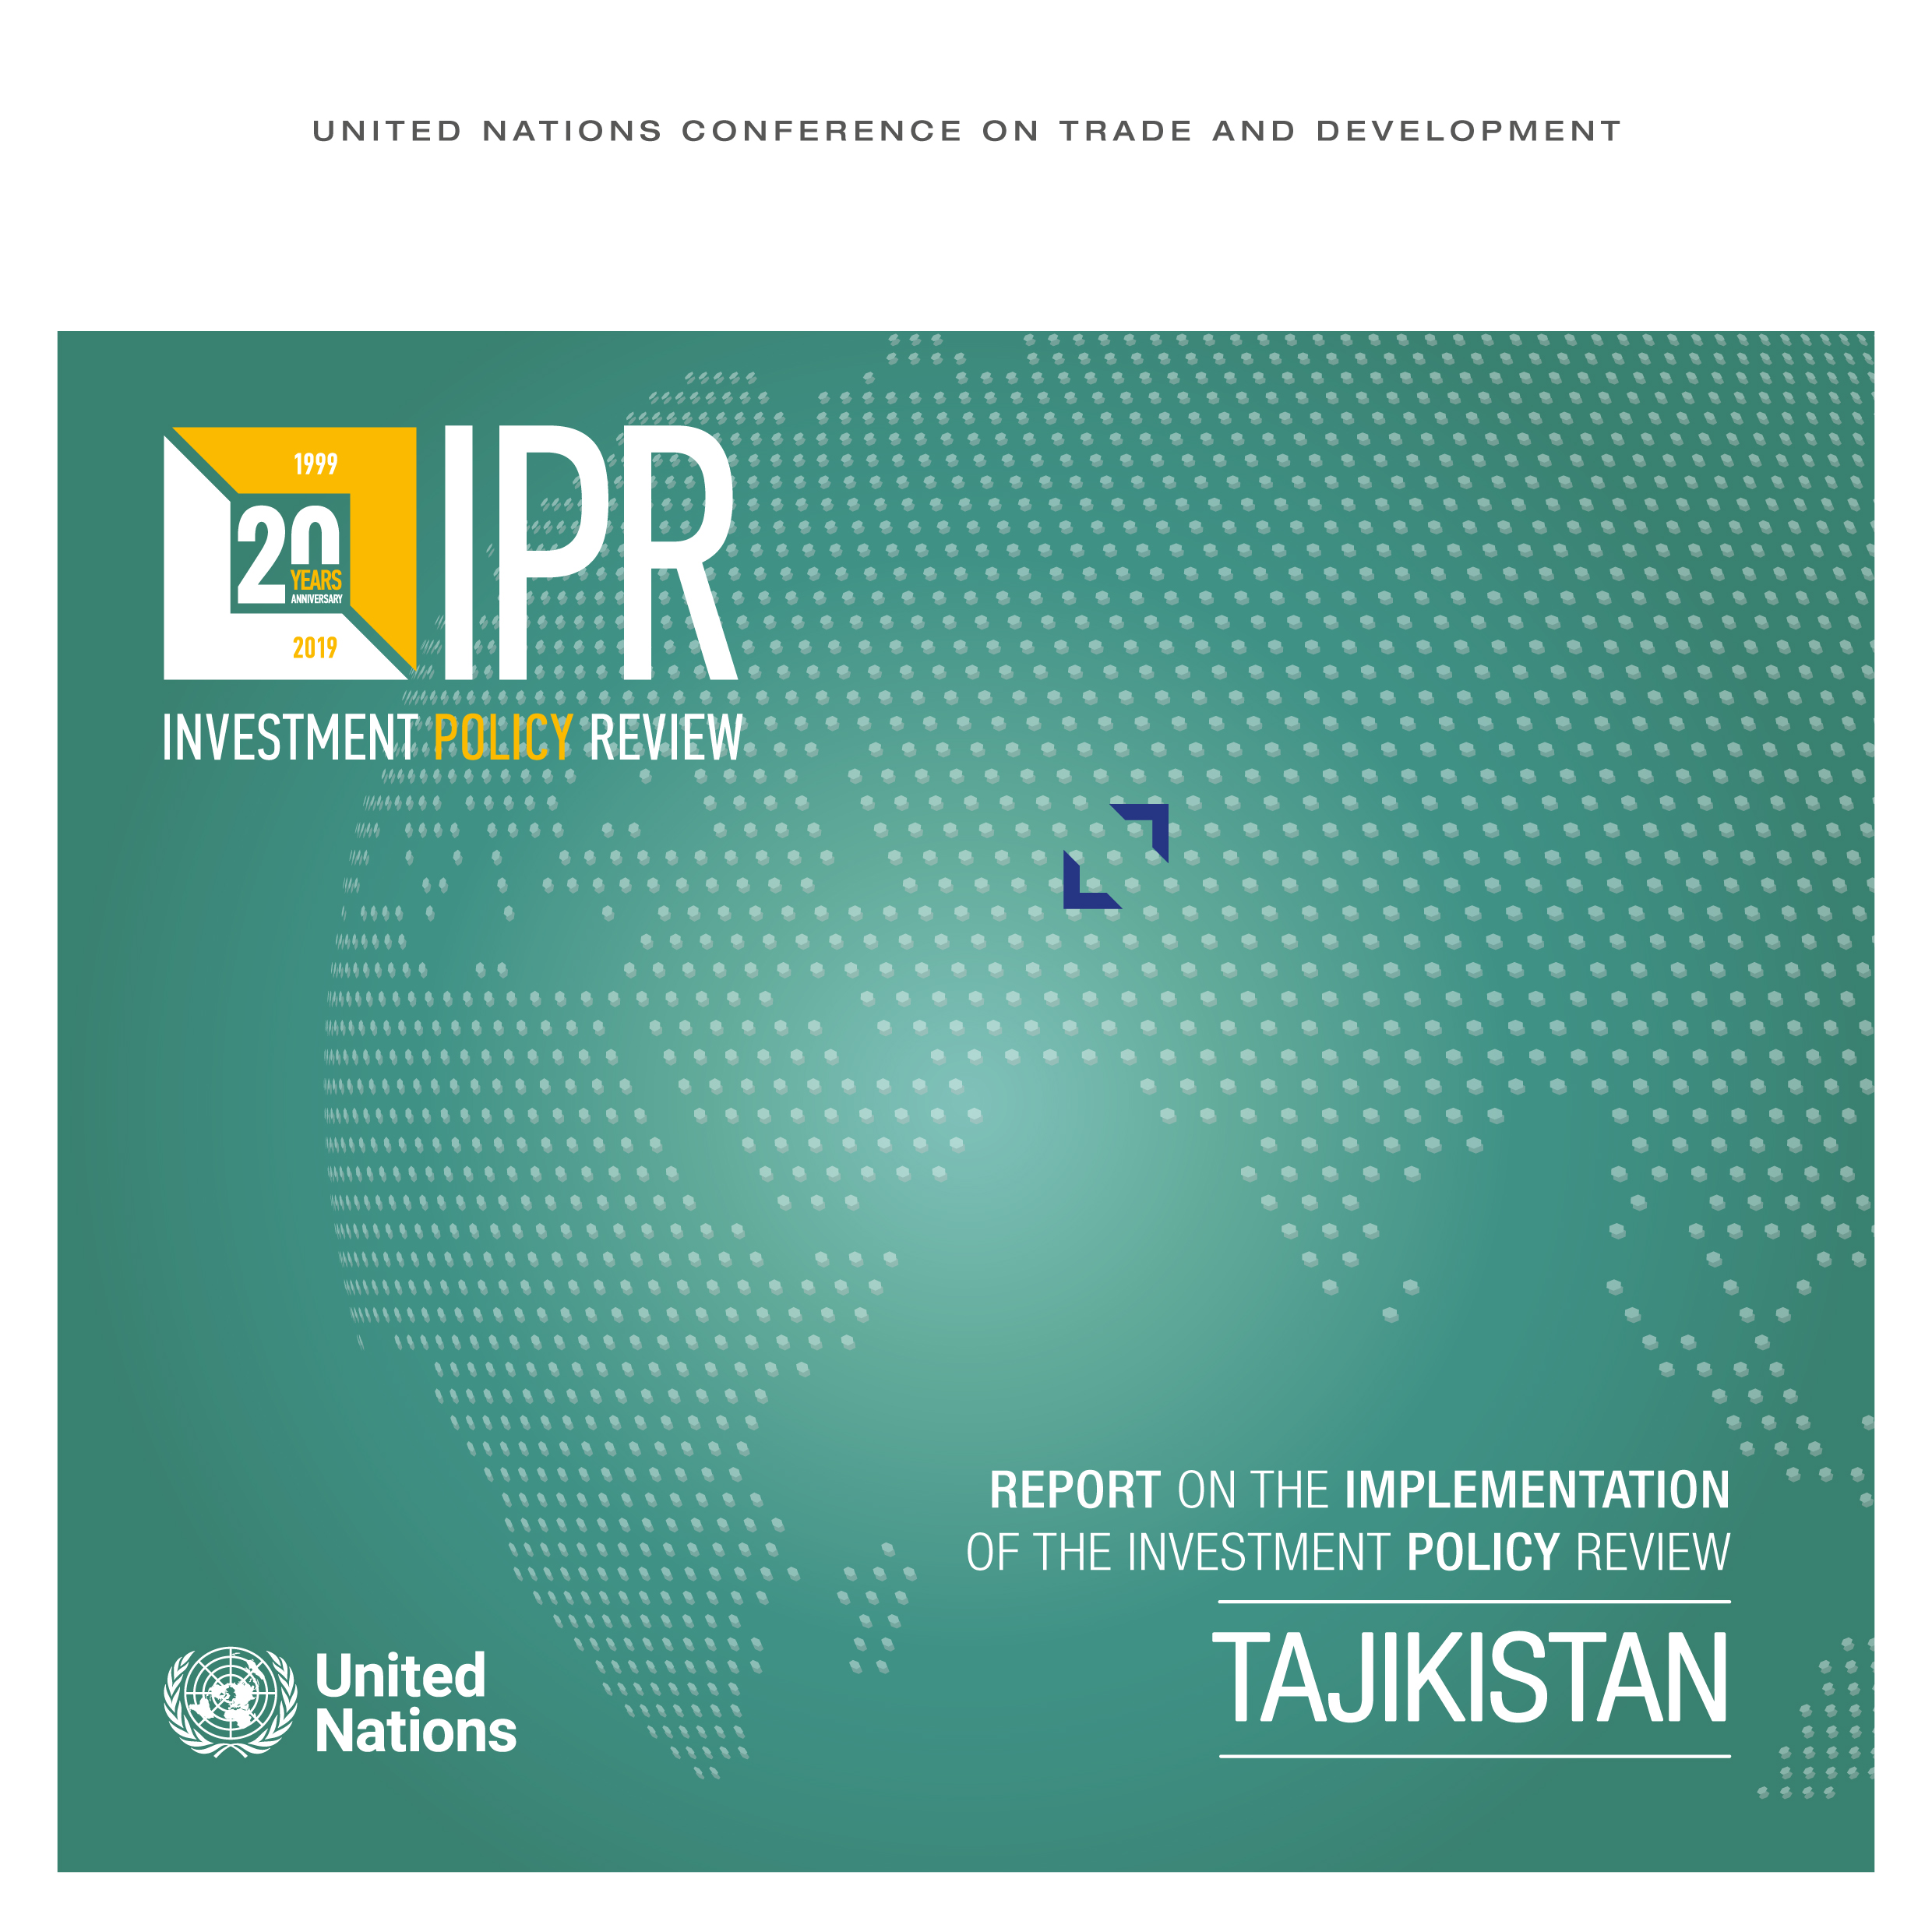 image of Report on the Implementation of the Investment Policy Review - Tajikistan